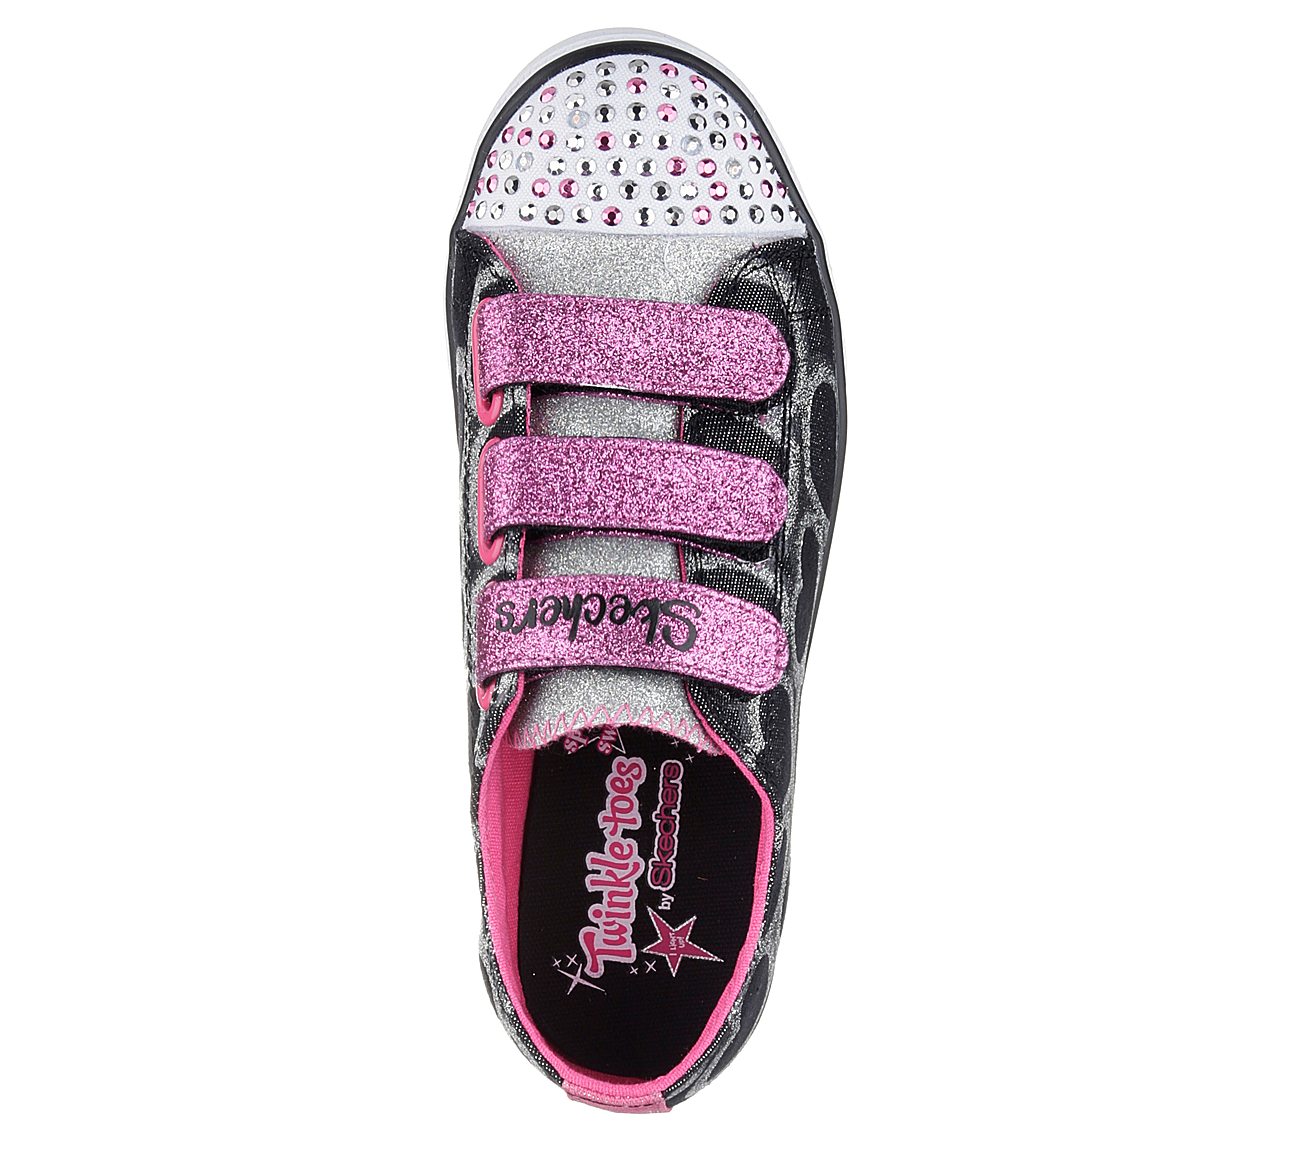 how to change battery in skechers twinkle toes